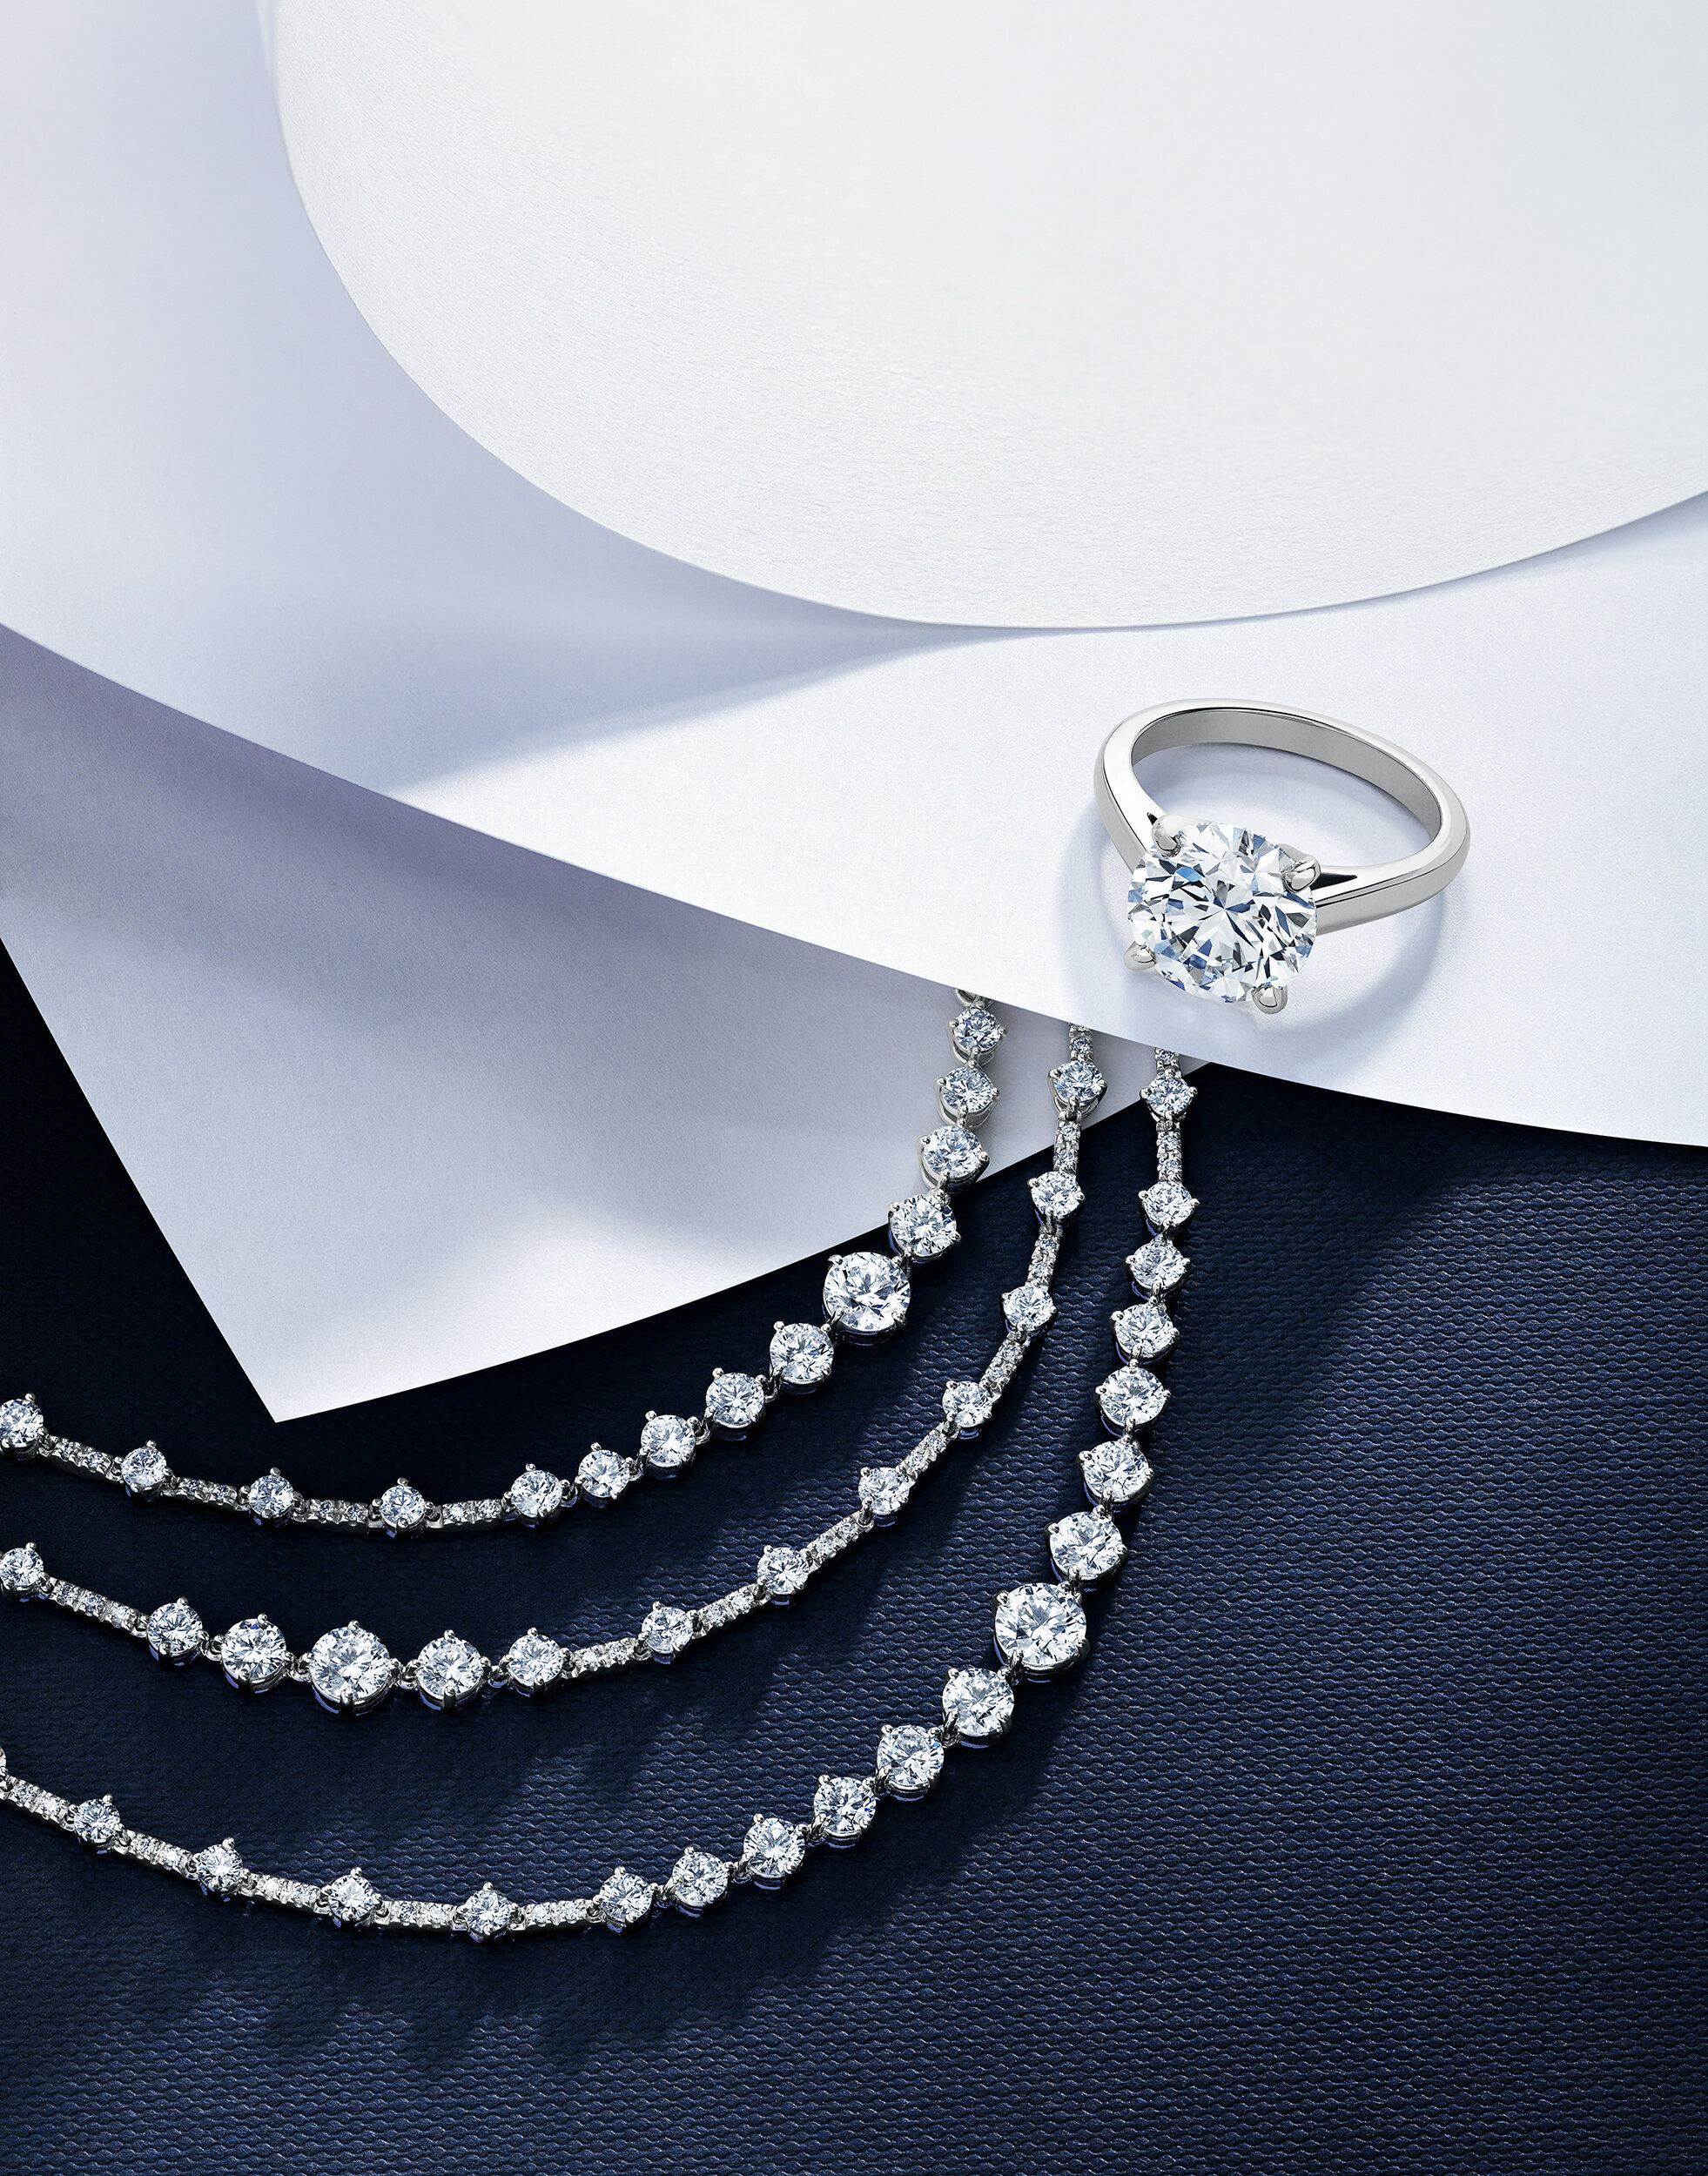  Diamond necklace and ring shot for De Beers 